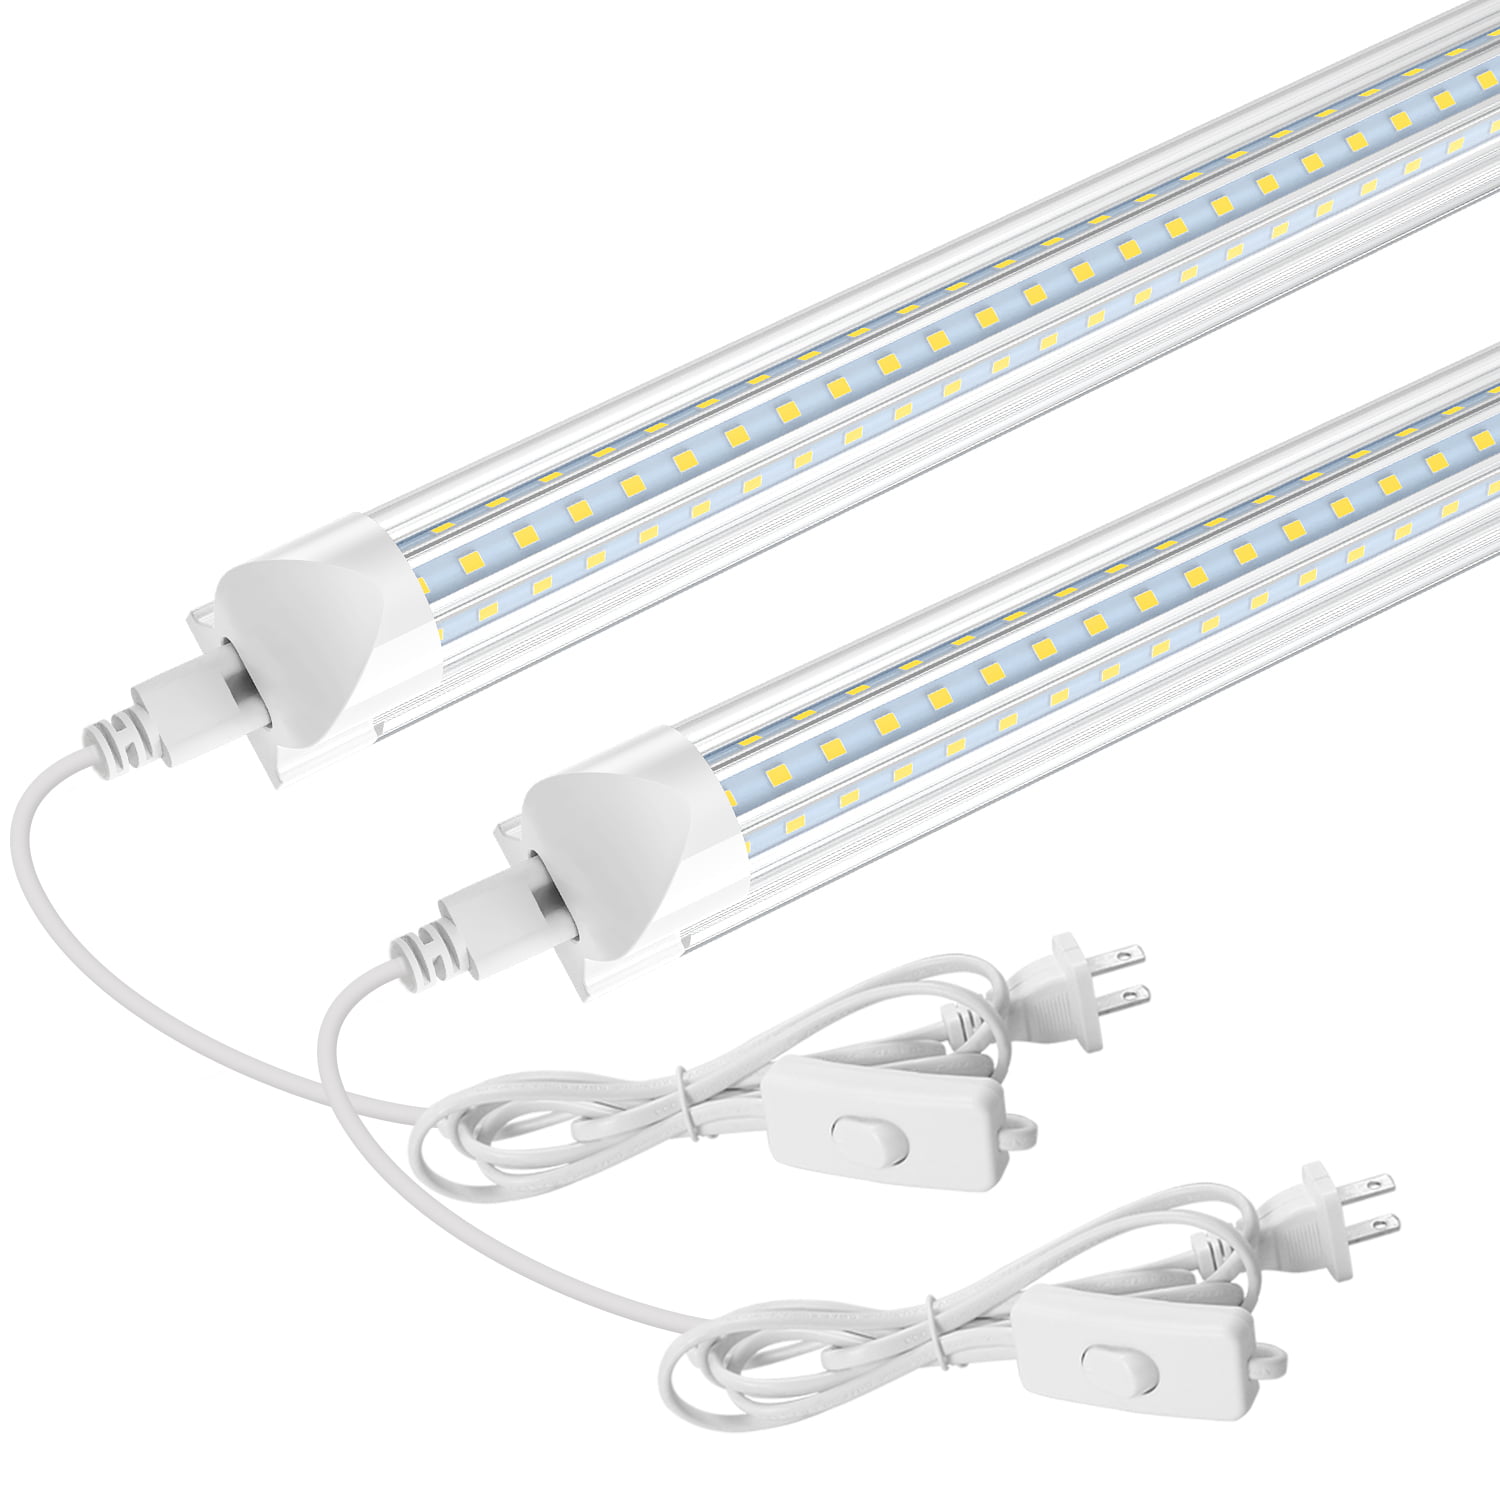 Power & Link Cable 2pcs 20w Integrated LED Tube shop Light 40W Clear Frosted 